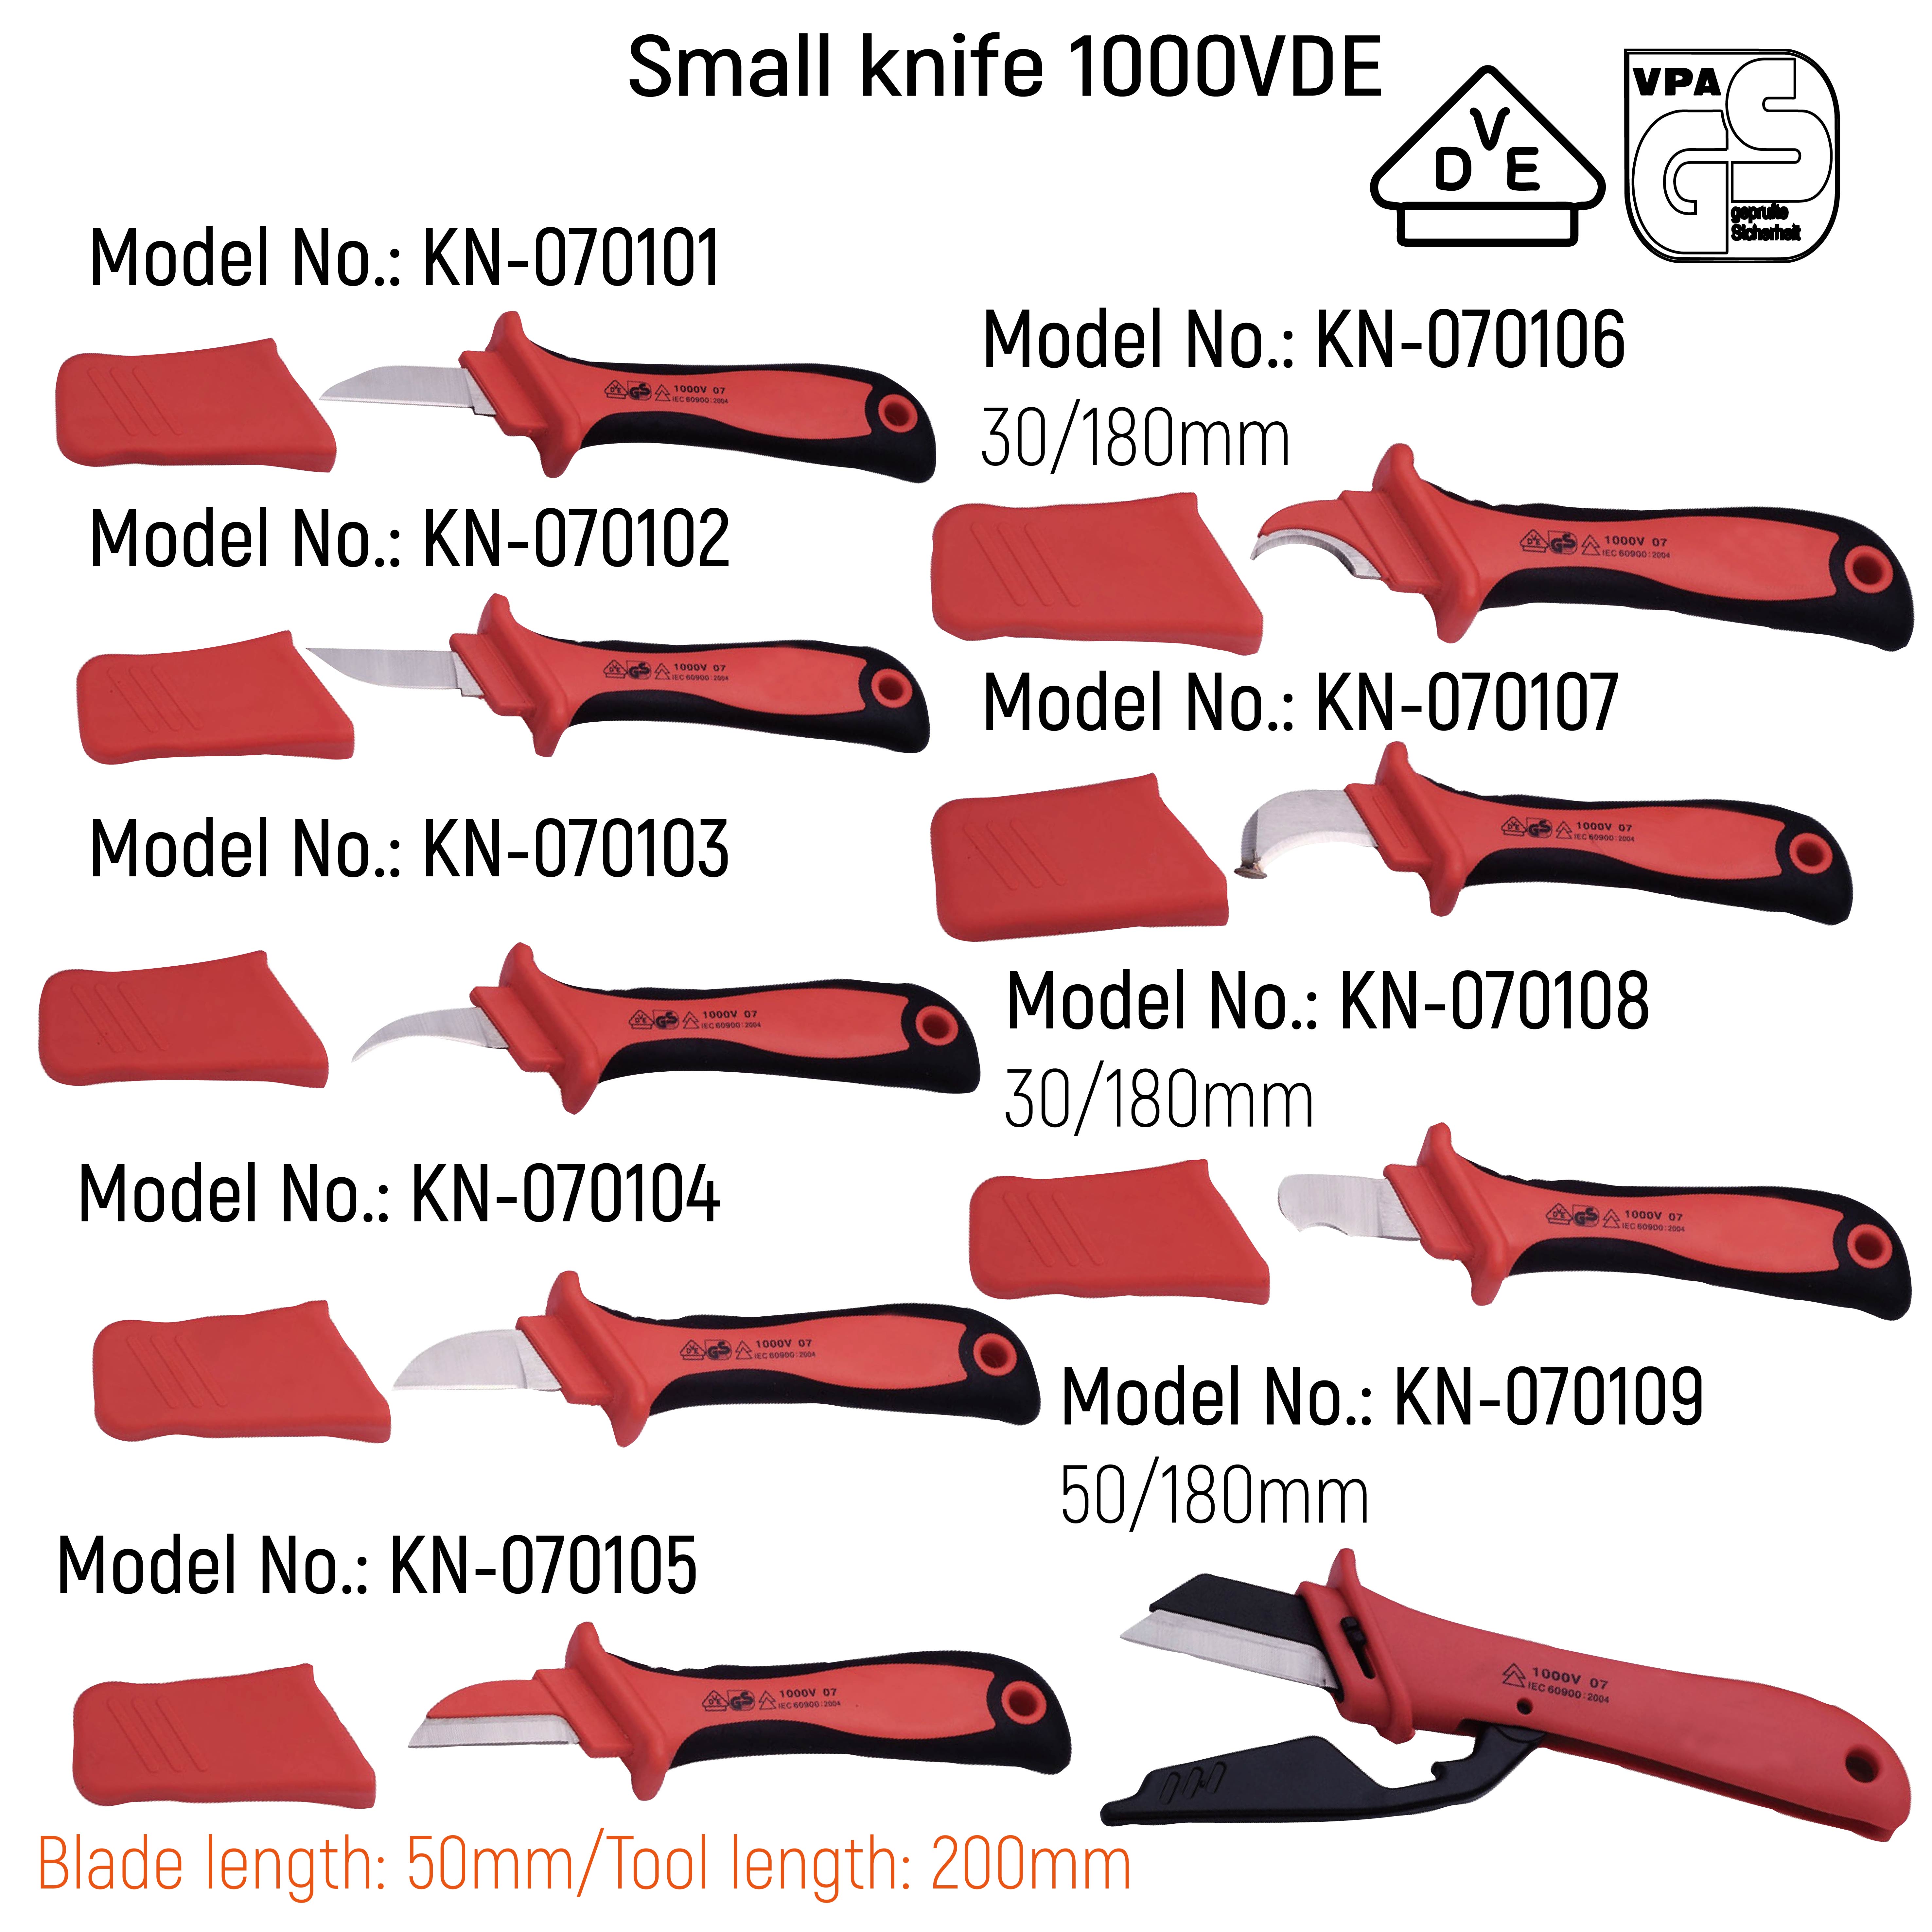 VDE SMALL KNIFE, CABLE STRIPPERS